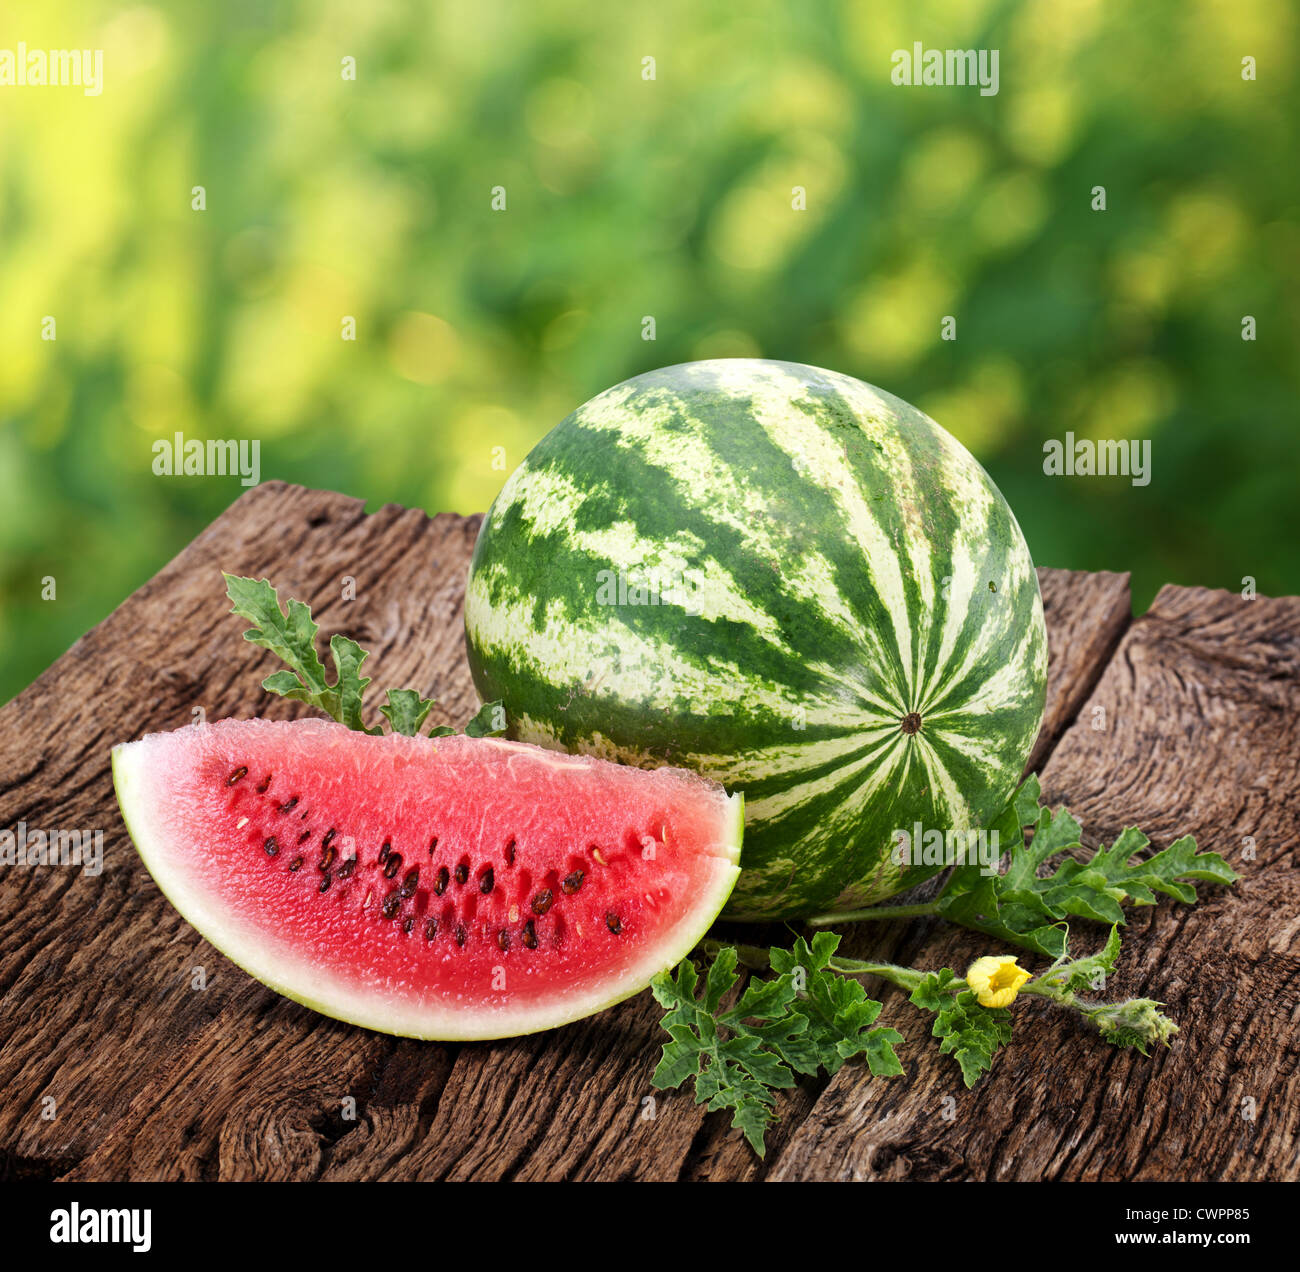 Watermelon with a slice and leaves on a wooden table. Background - blur of nature. Stock Photo